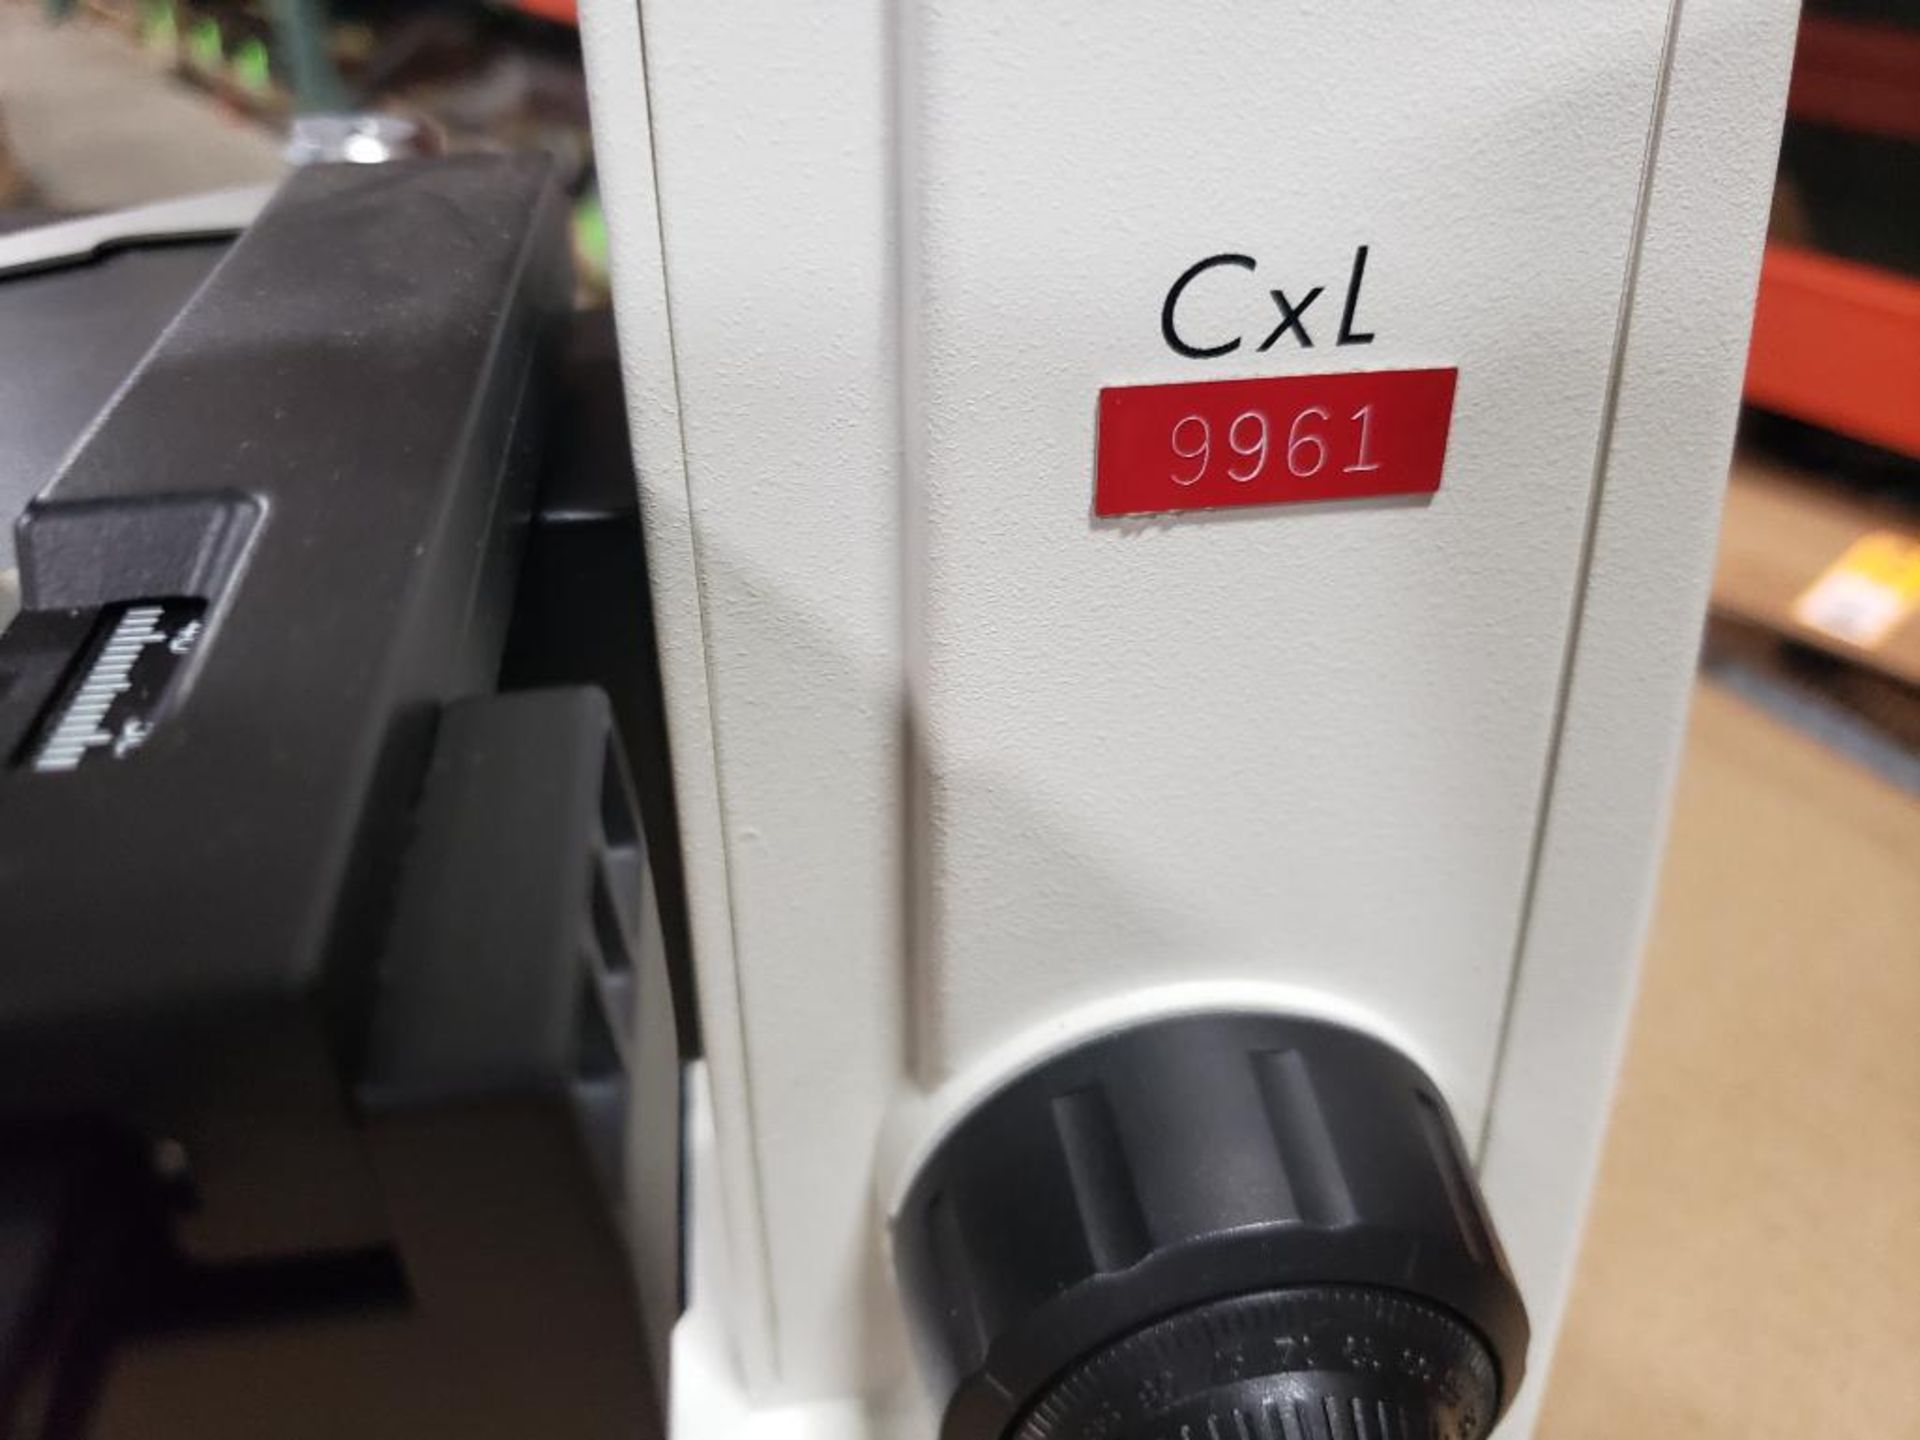 Labomed CxL 9961 microscope. - Image 2 of 8